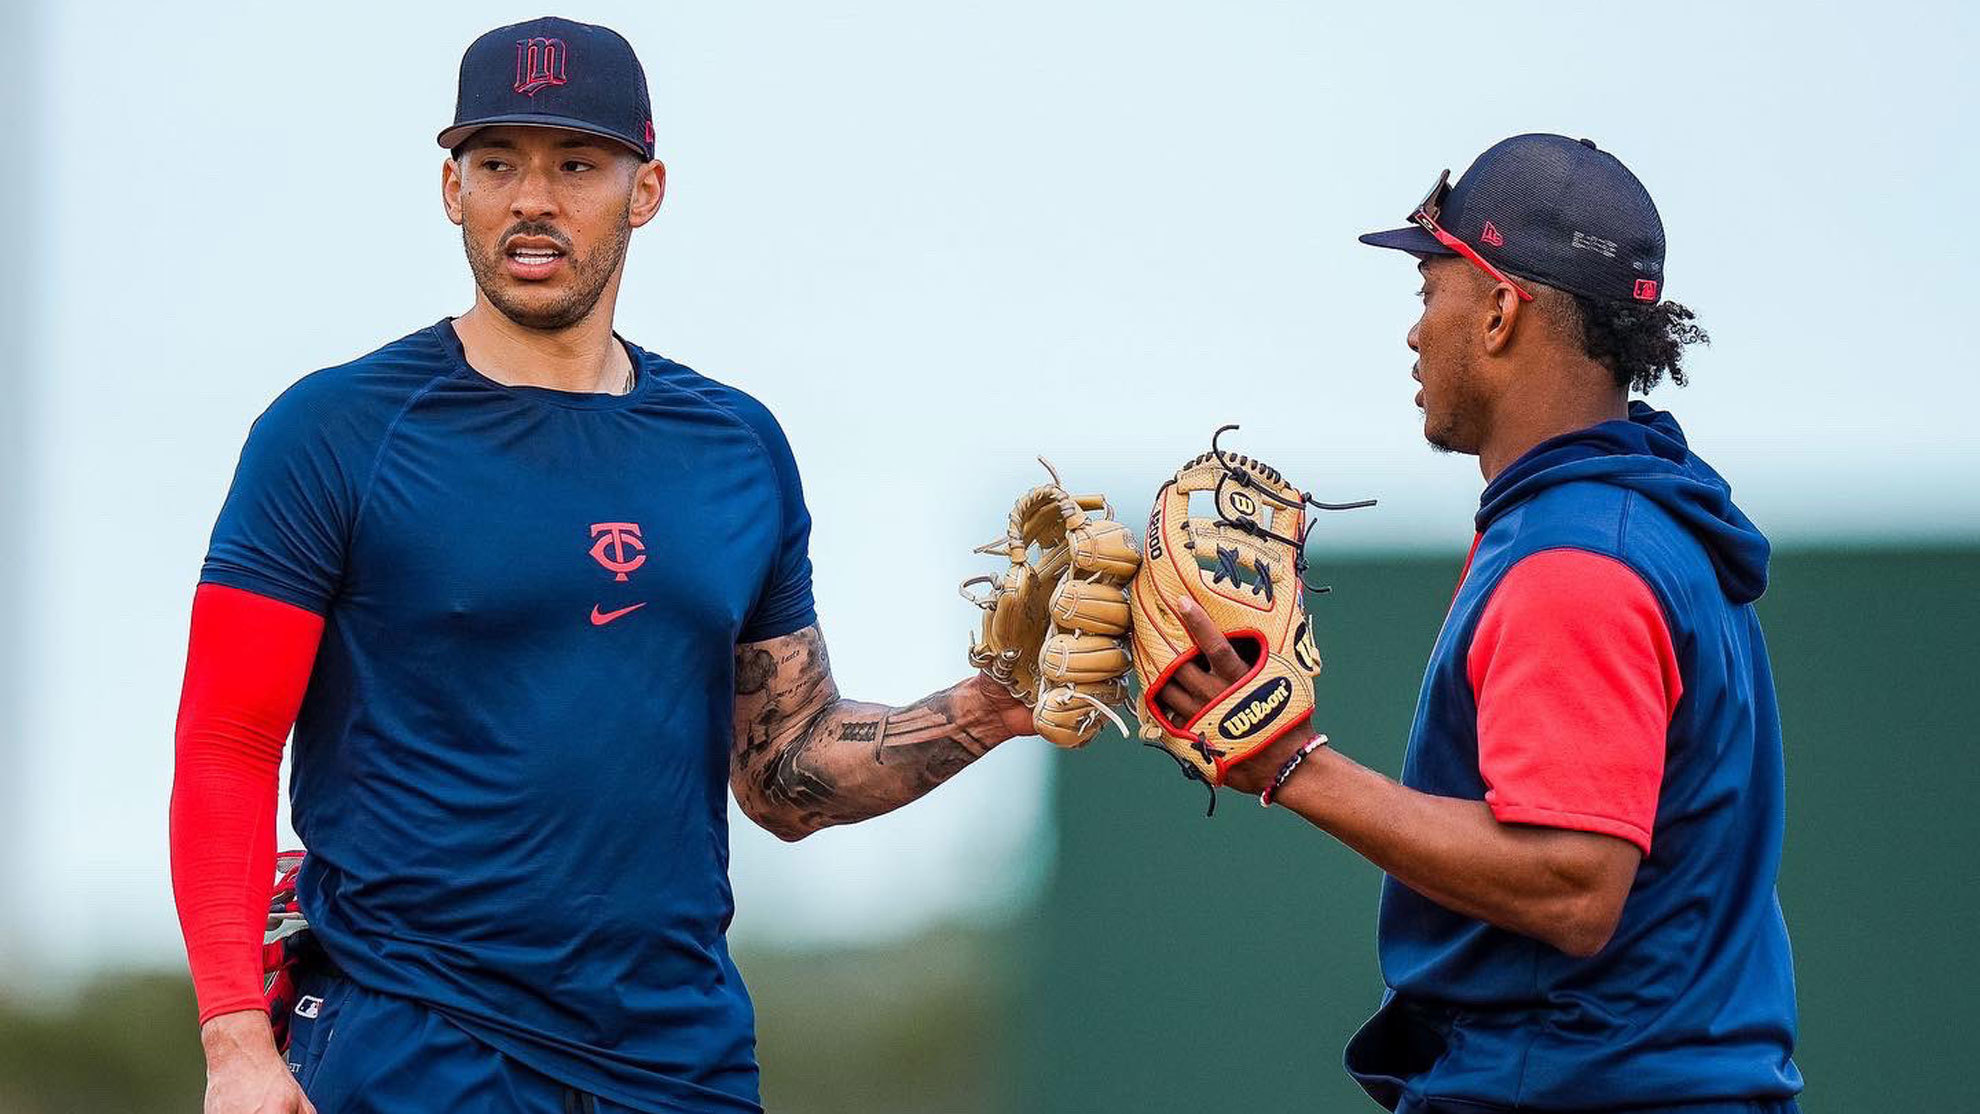 The Minnesota Twins bet on Latino power to get into the fight